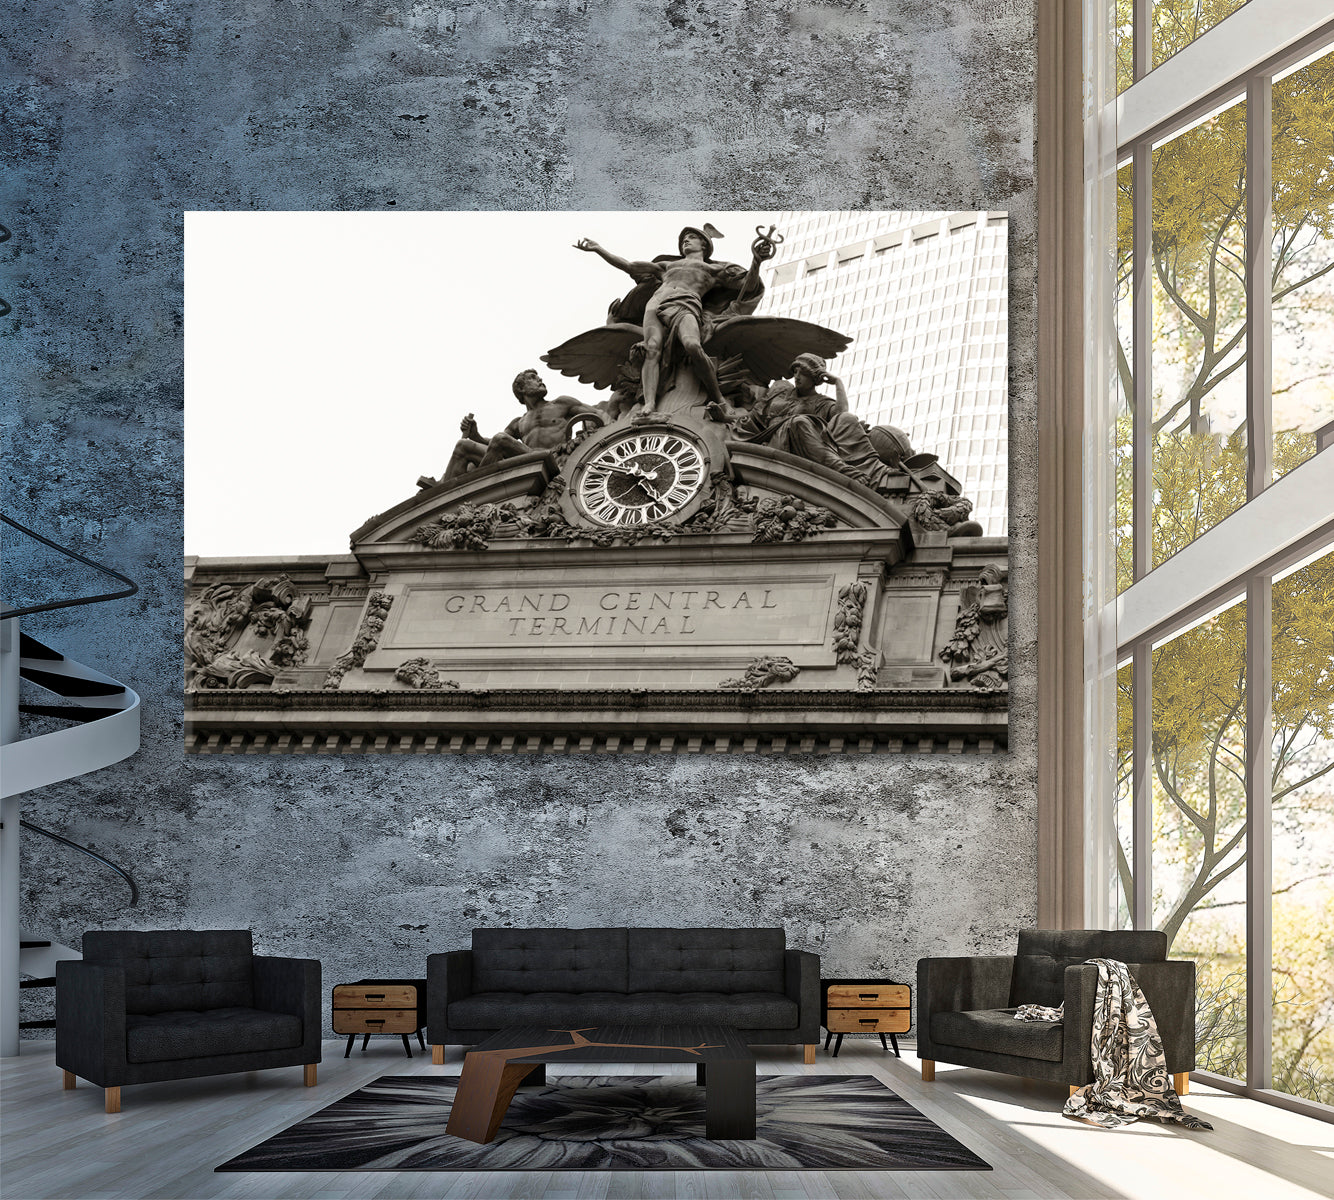 Grand Central Station New York Canvas Print ArtLexy 1 Panel 24"x16" inches 